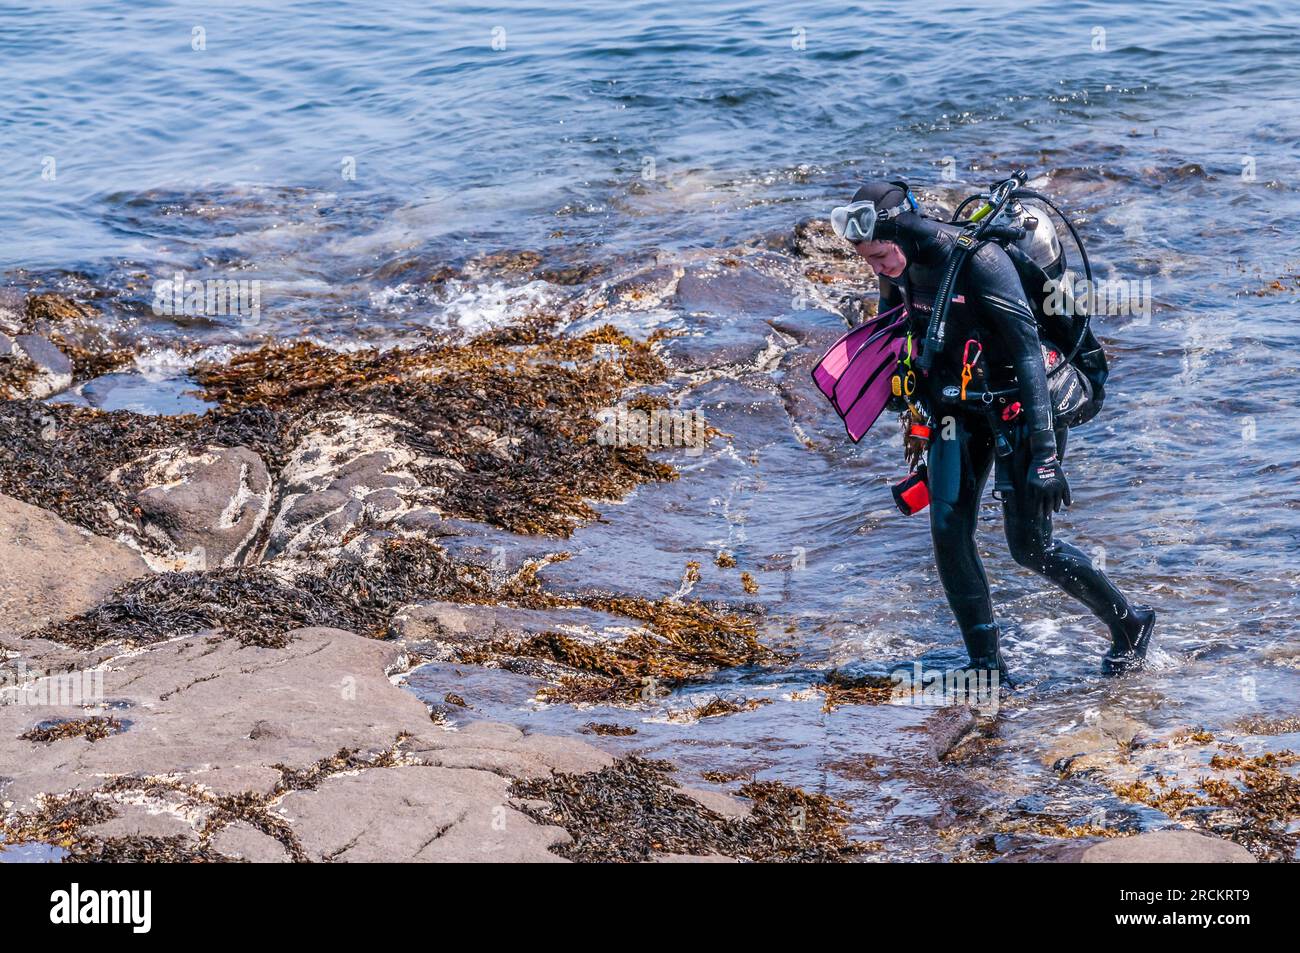 Scuba diver walks out of the ocean completely exhausted after swimming against the ocean current between tides. Some currents can be very strong. Stock Photo